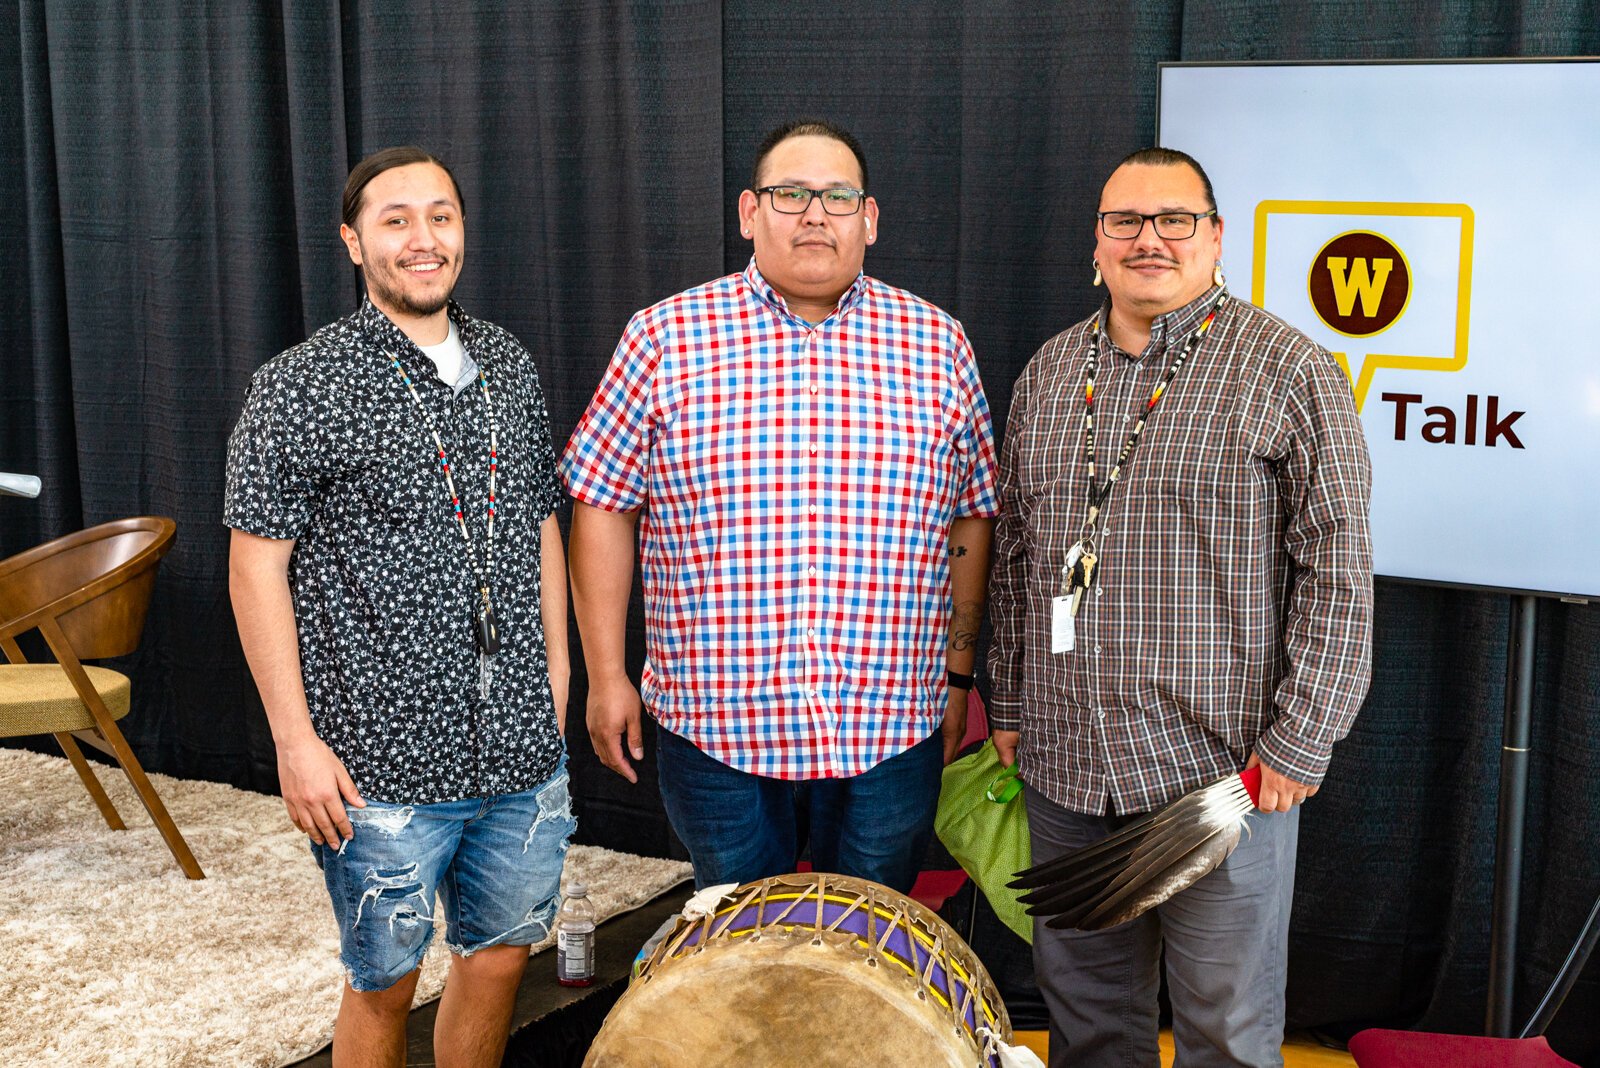 The new WMU Graduate Certificate in Tribal Leadership was announced at an April “We Talk” event.